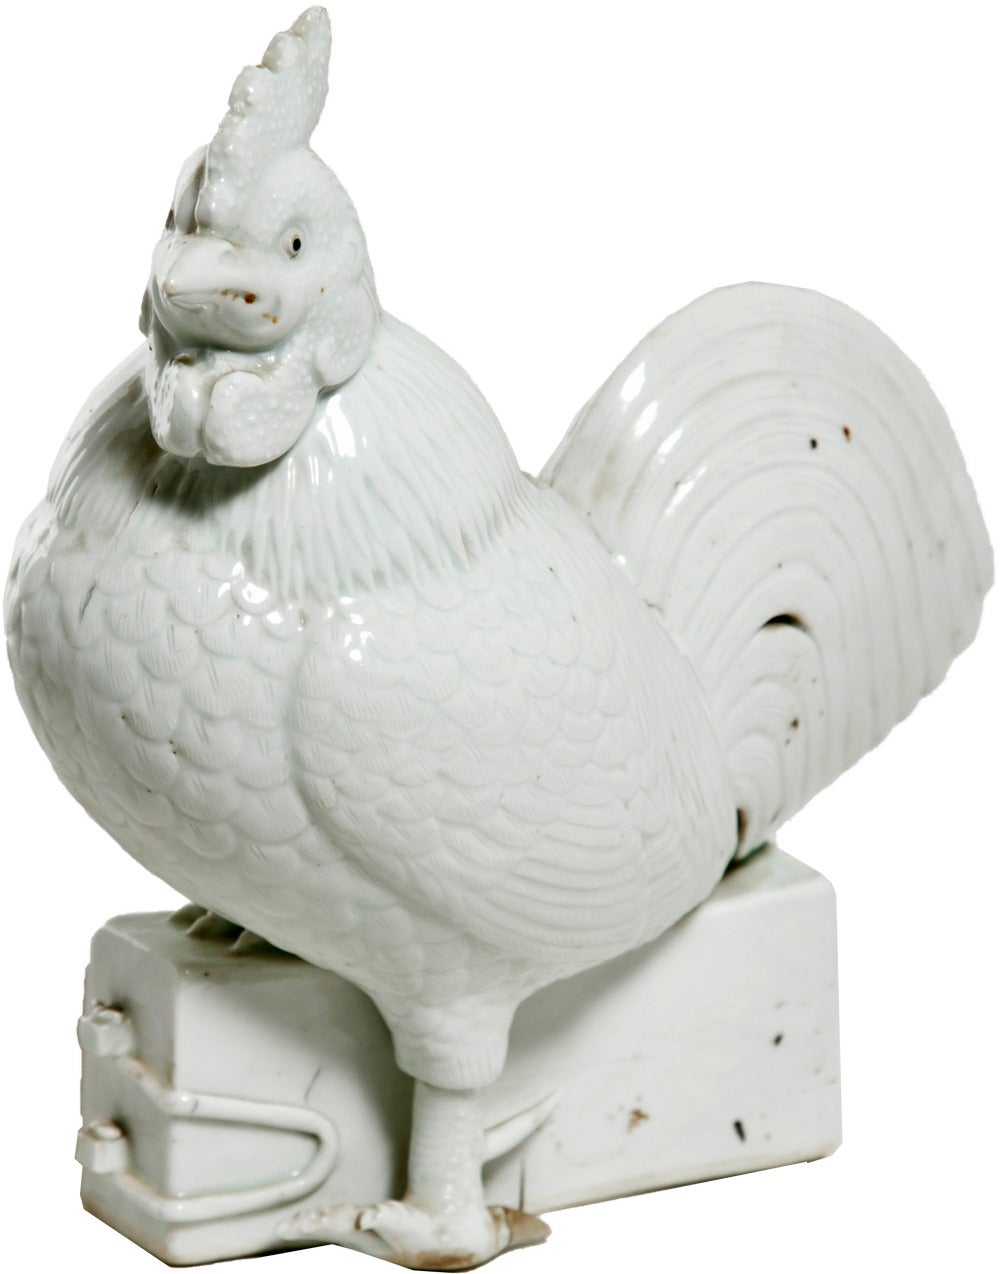 Qing Period Ceramic Rooster